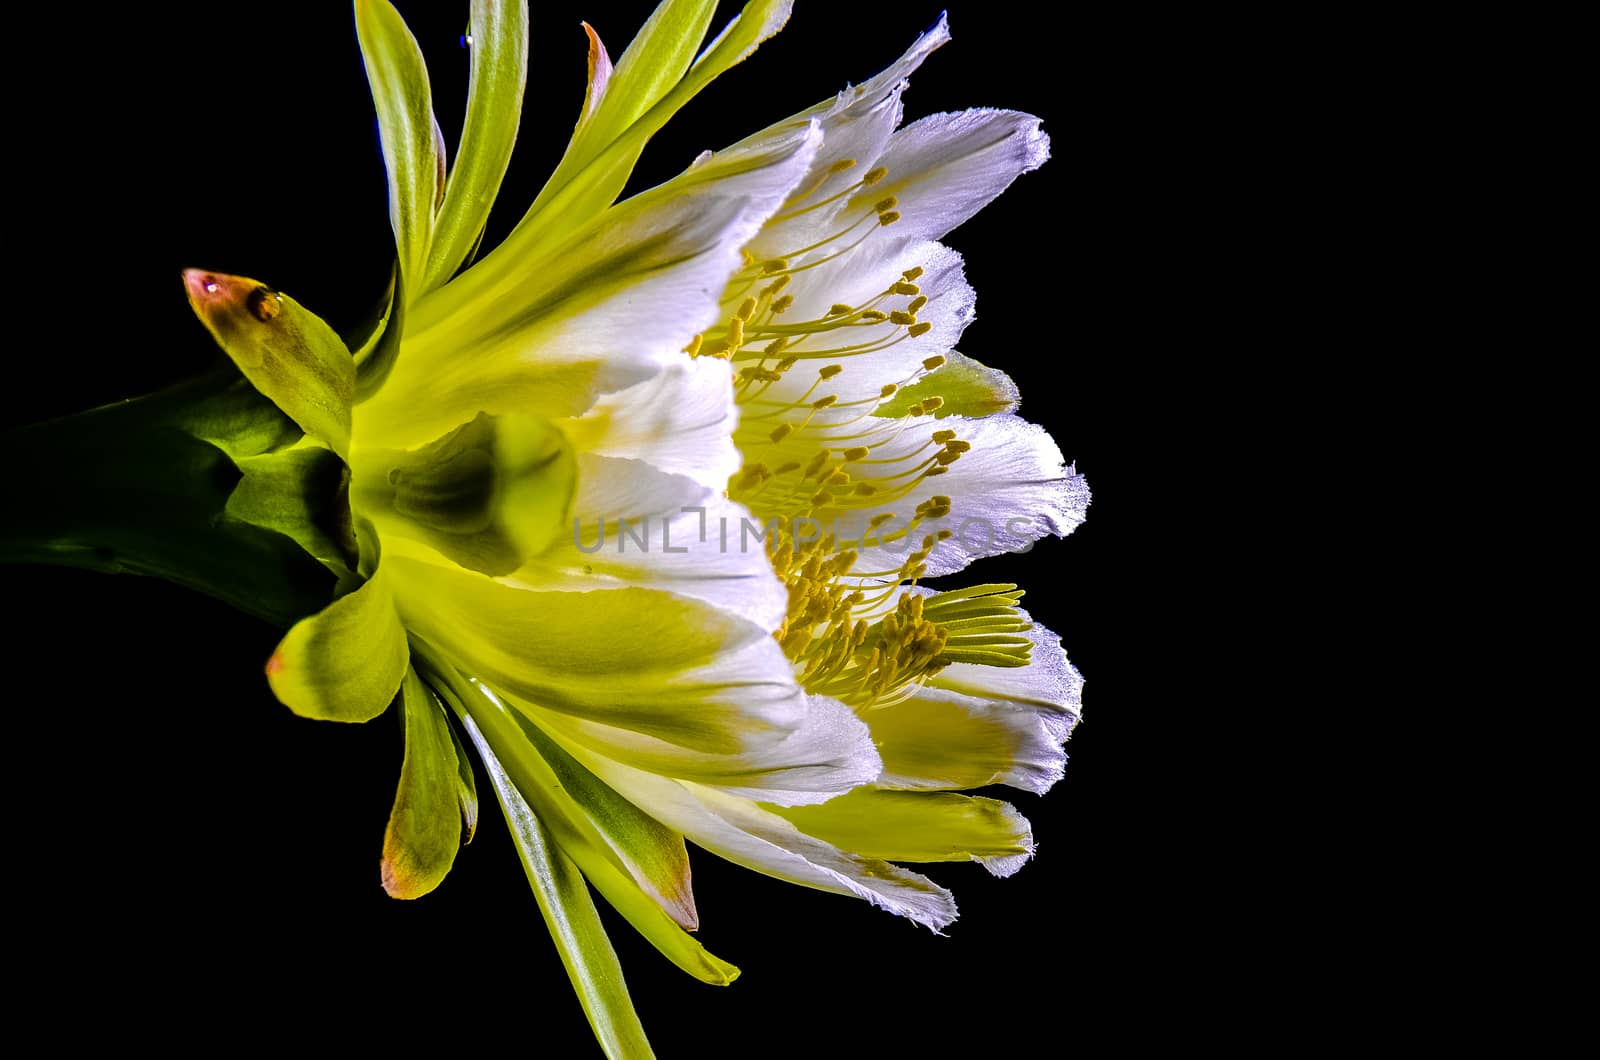 The beautiful large night blooming cereus flower on black background